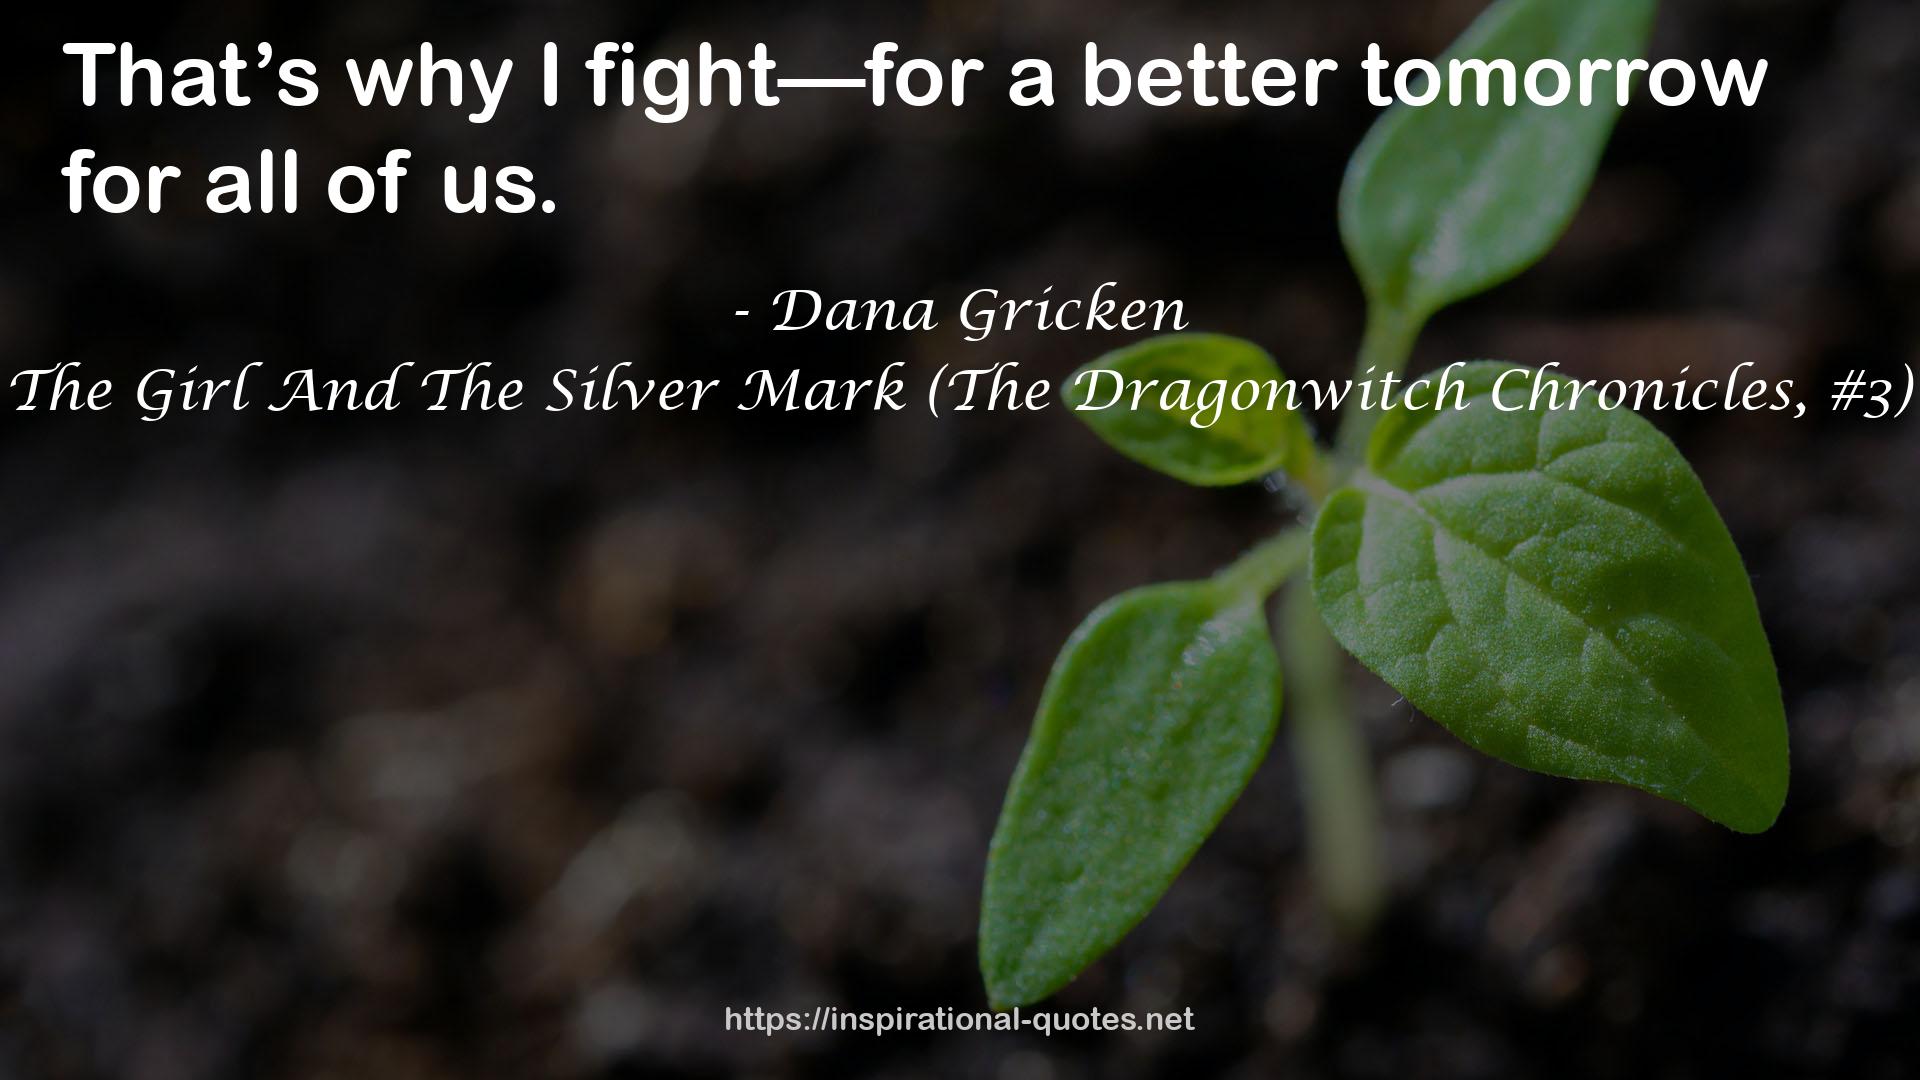 The Girl And The Silver Mark (The Dragonwitch Chronicles, #3) QUOTES